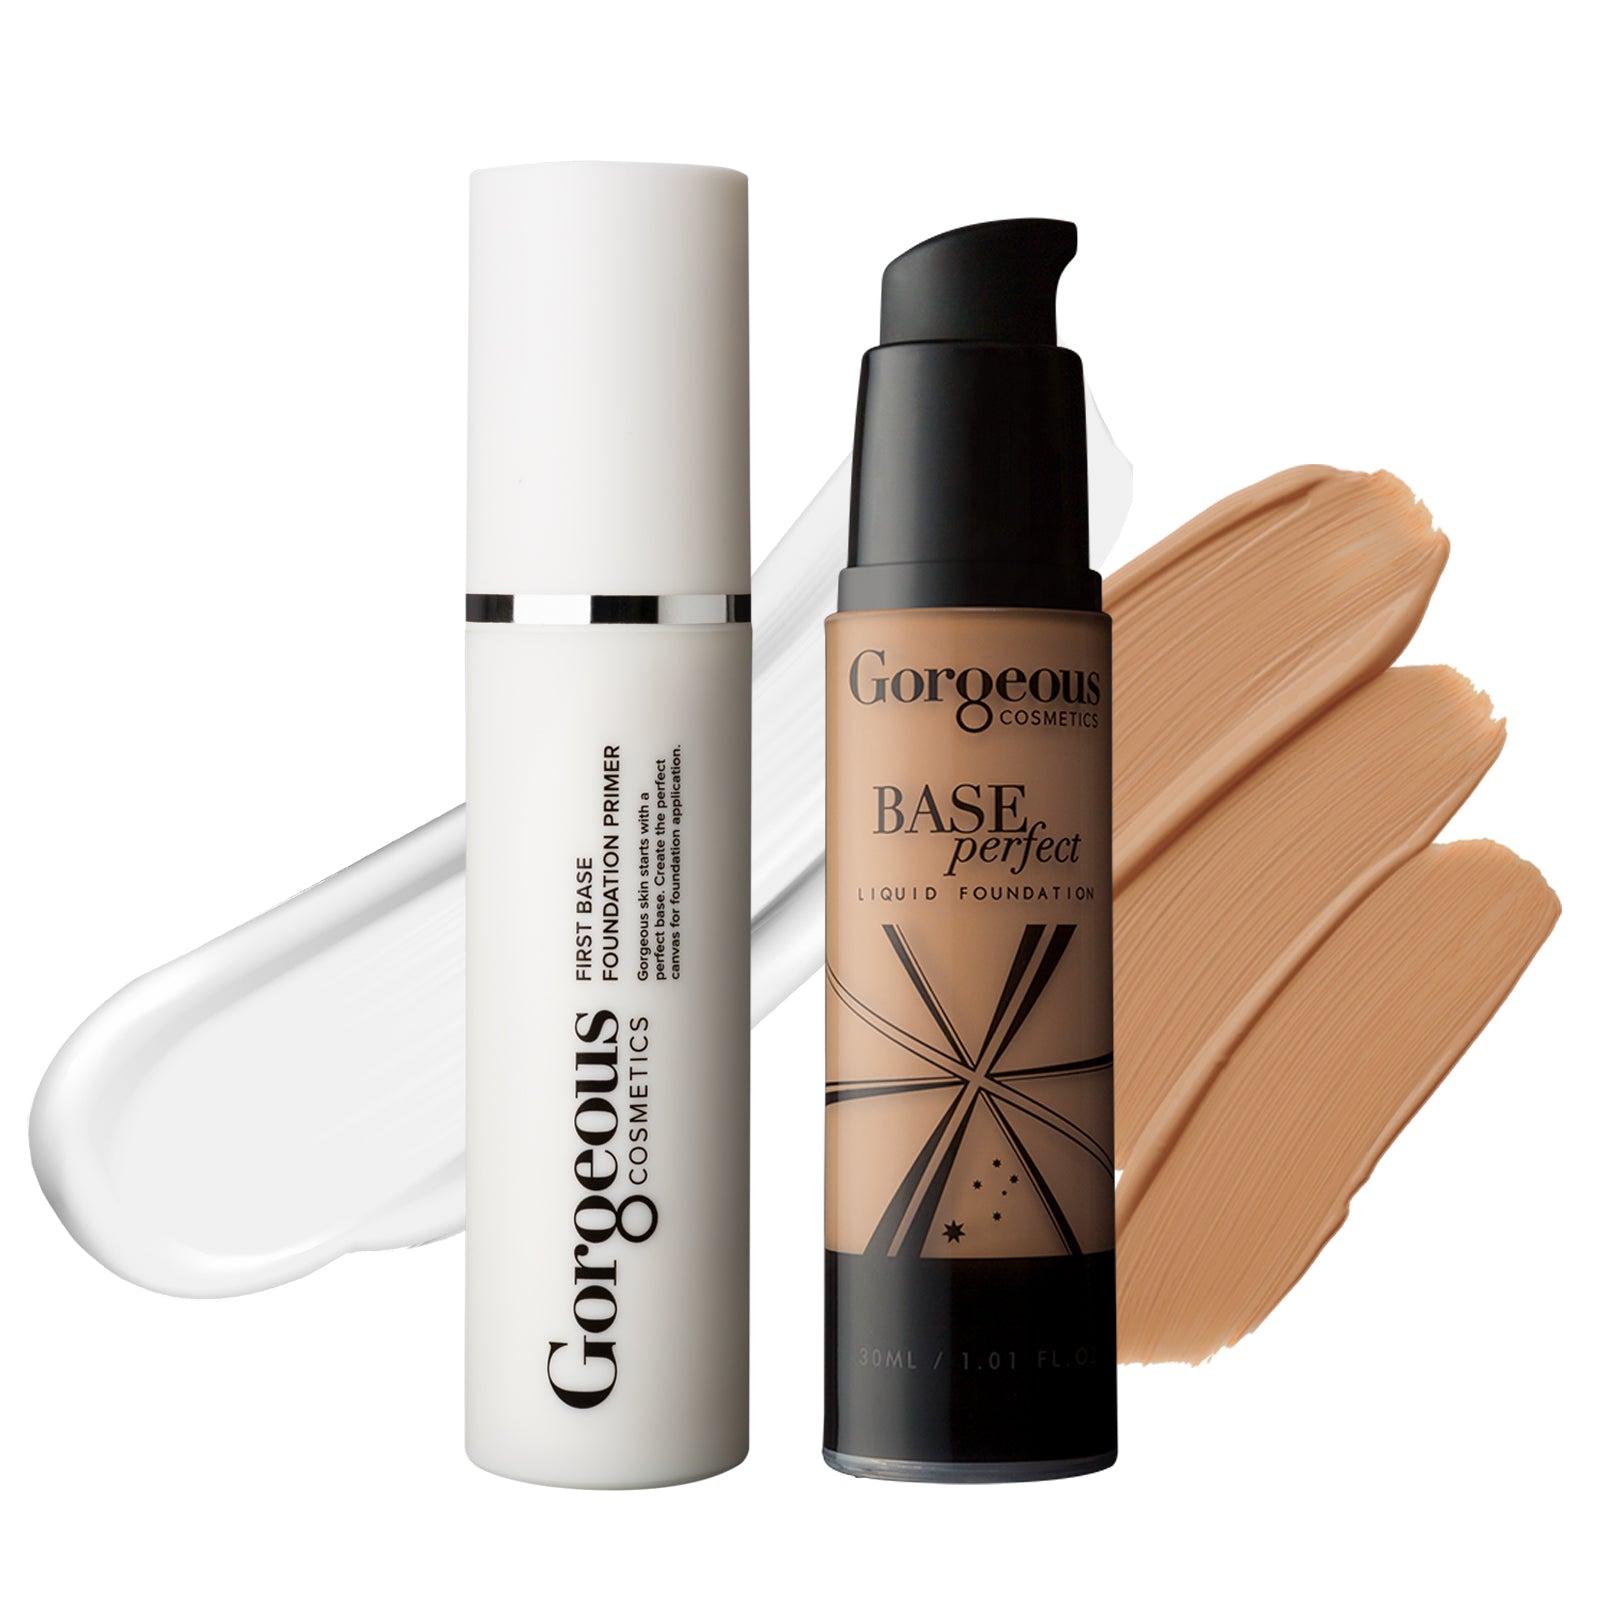 Foundation and Primer Pack